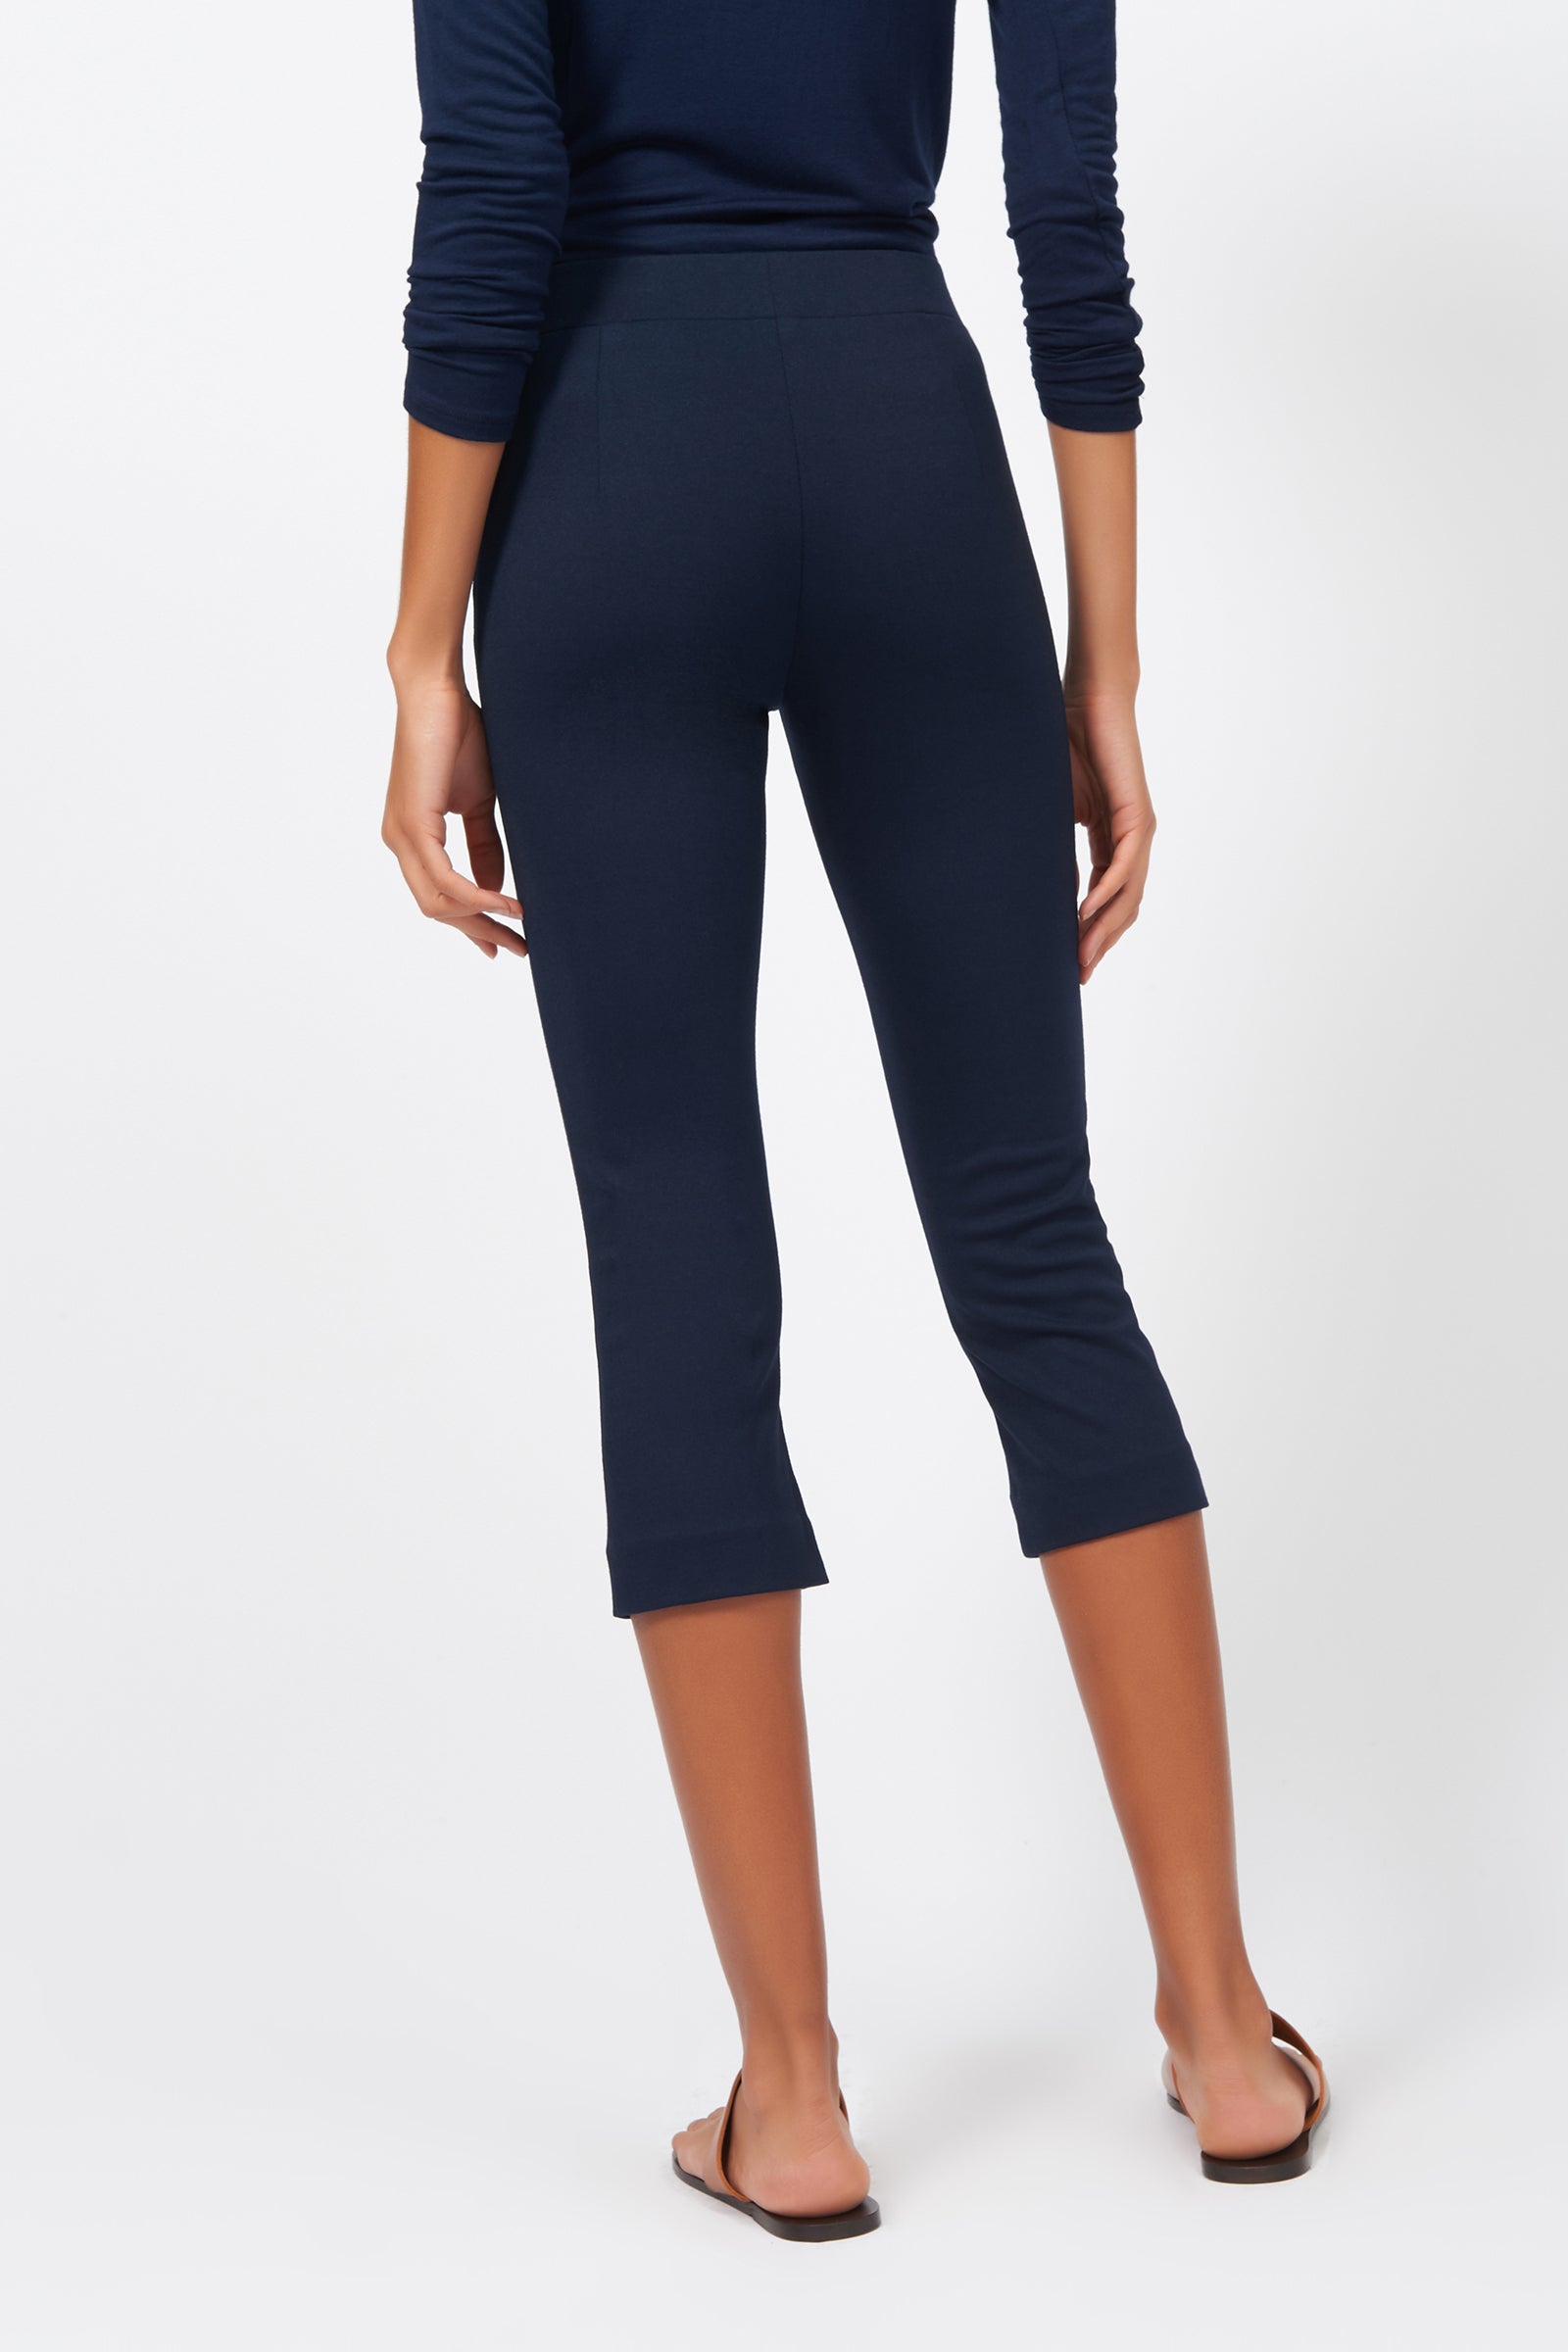 Kal Rieman Pintuck Ponte 3/4 Pant in Navy on Model Full Front Side View